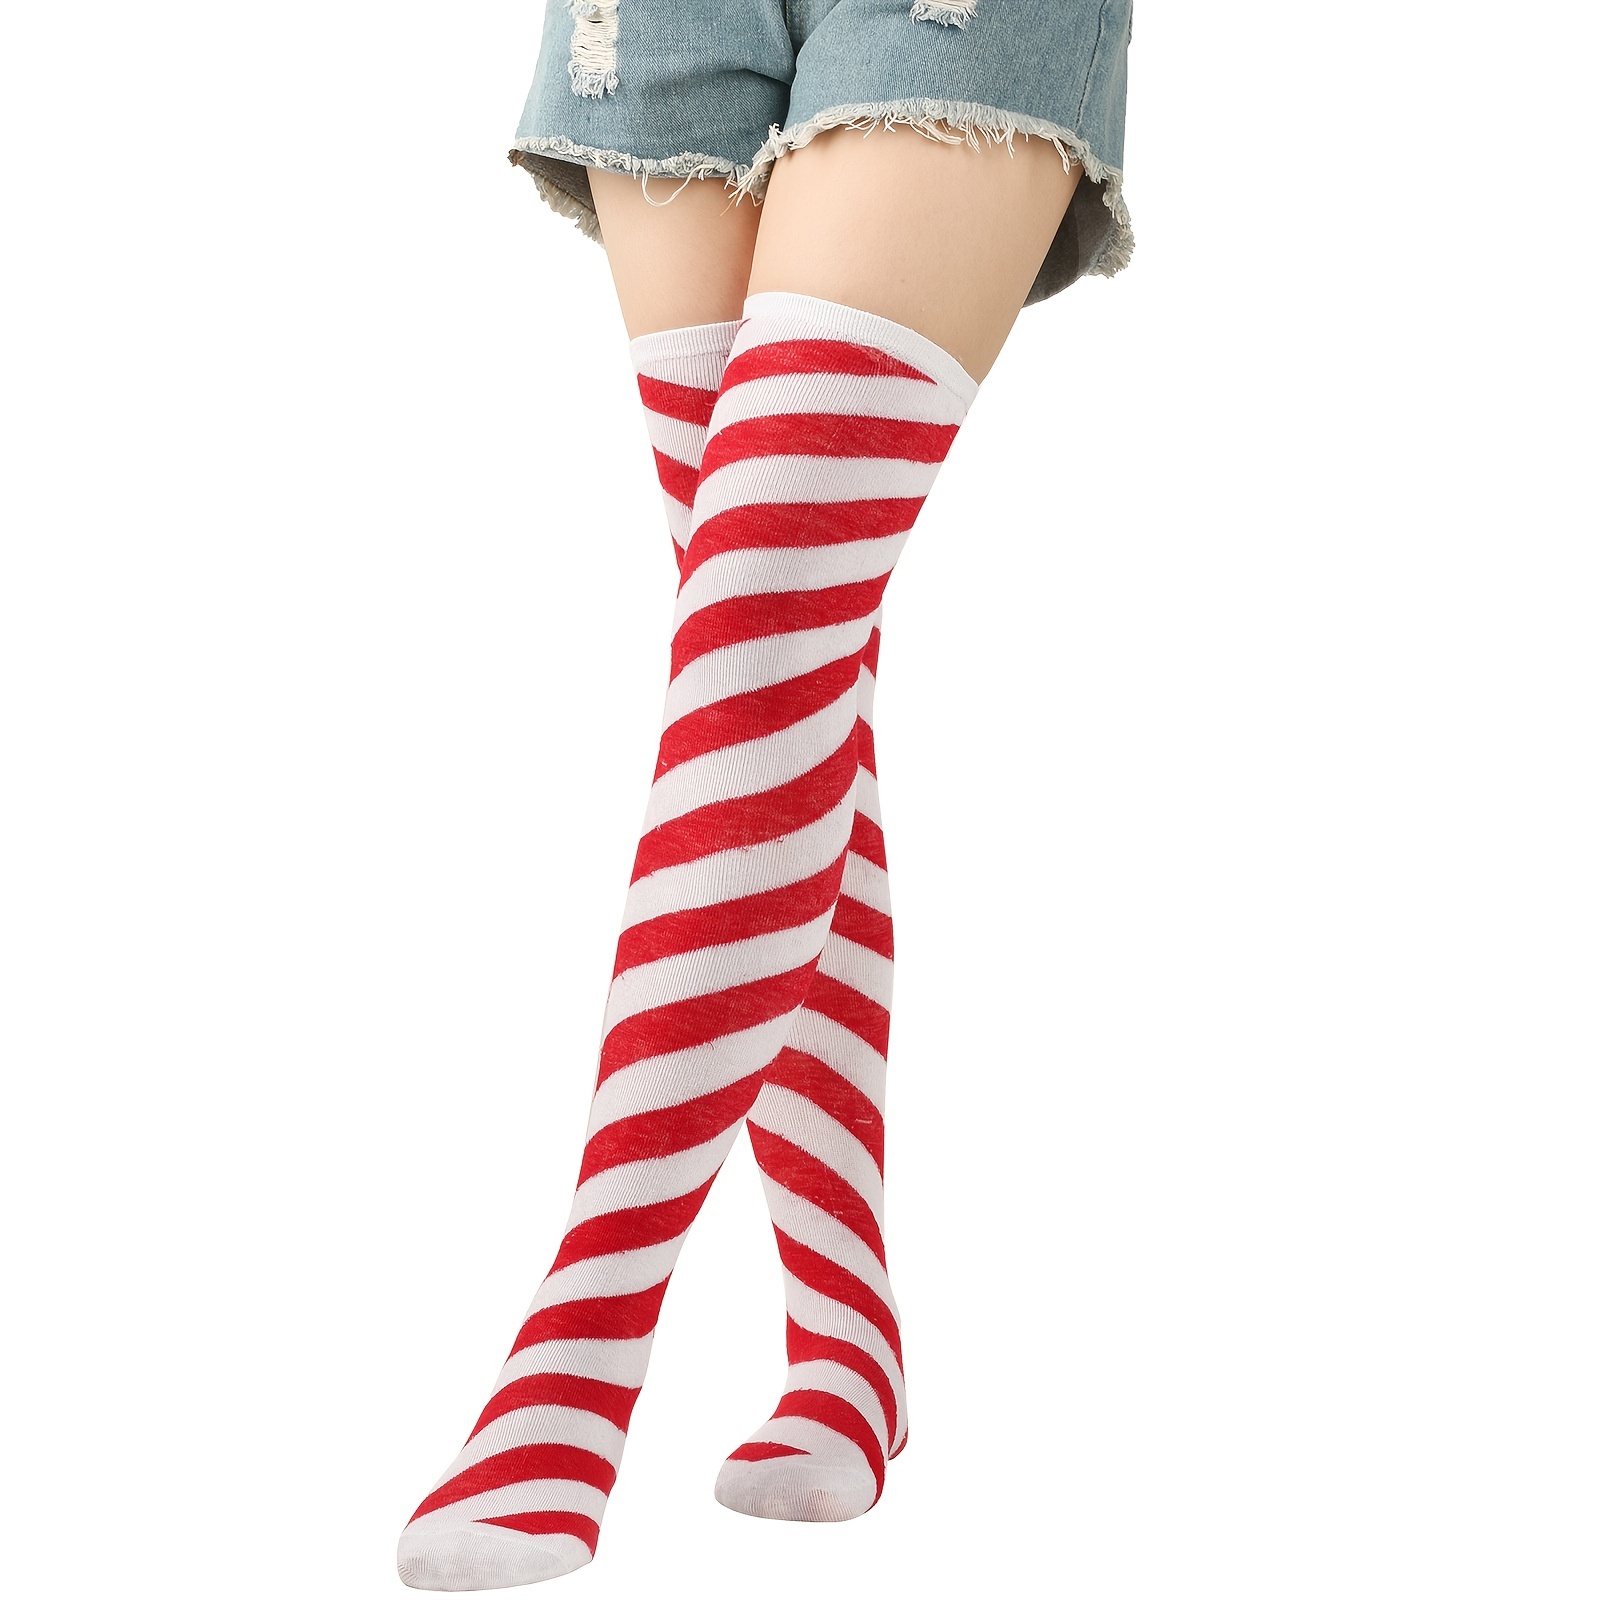 24 Pairs Thigh High Socks for Women Over the Knee Socks Long Thigh High  Stocking for Women Leg Warmer Daily Wear Cosplay, 2 Styles and 6 Colors